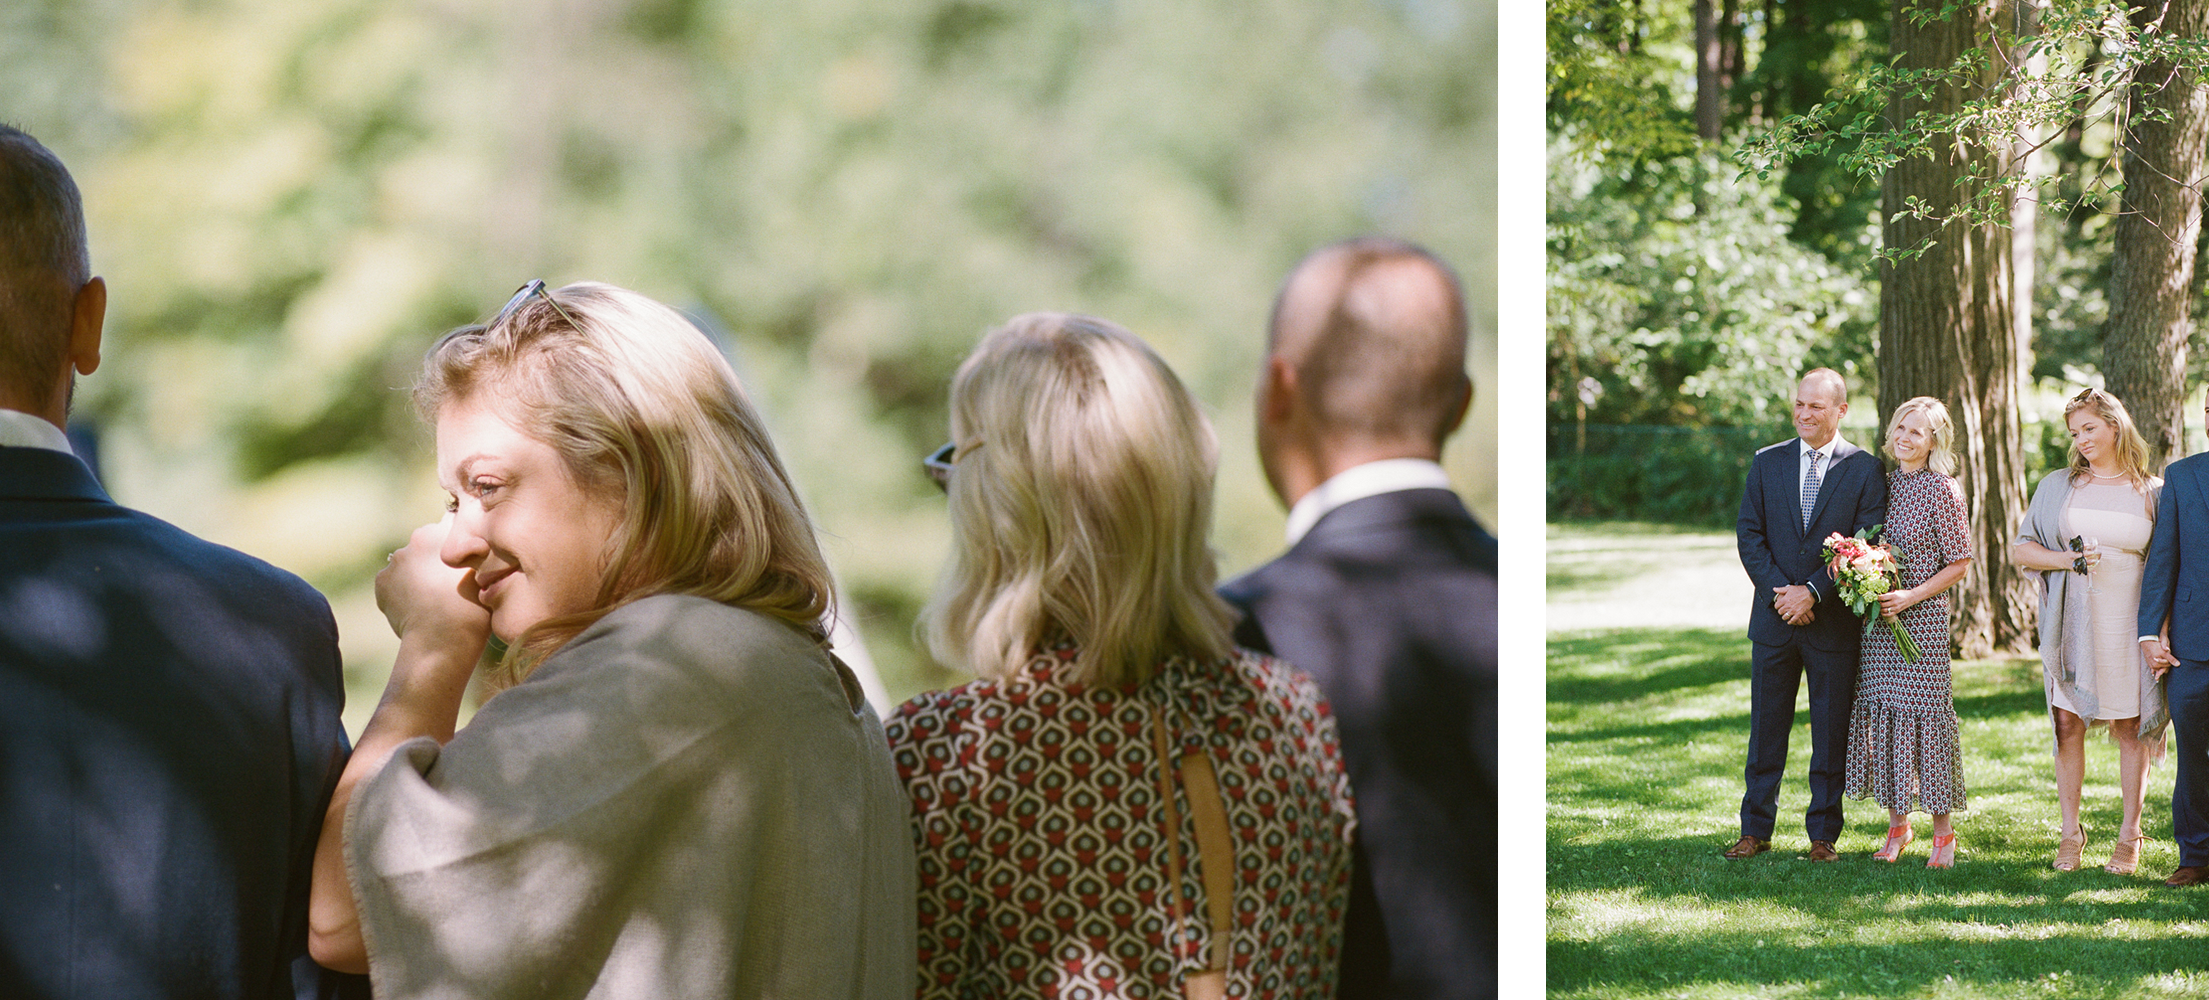 Backyard-Elopement-on-Film-Analog-Pool-Party-37.PNG